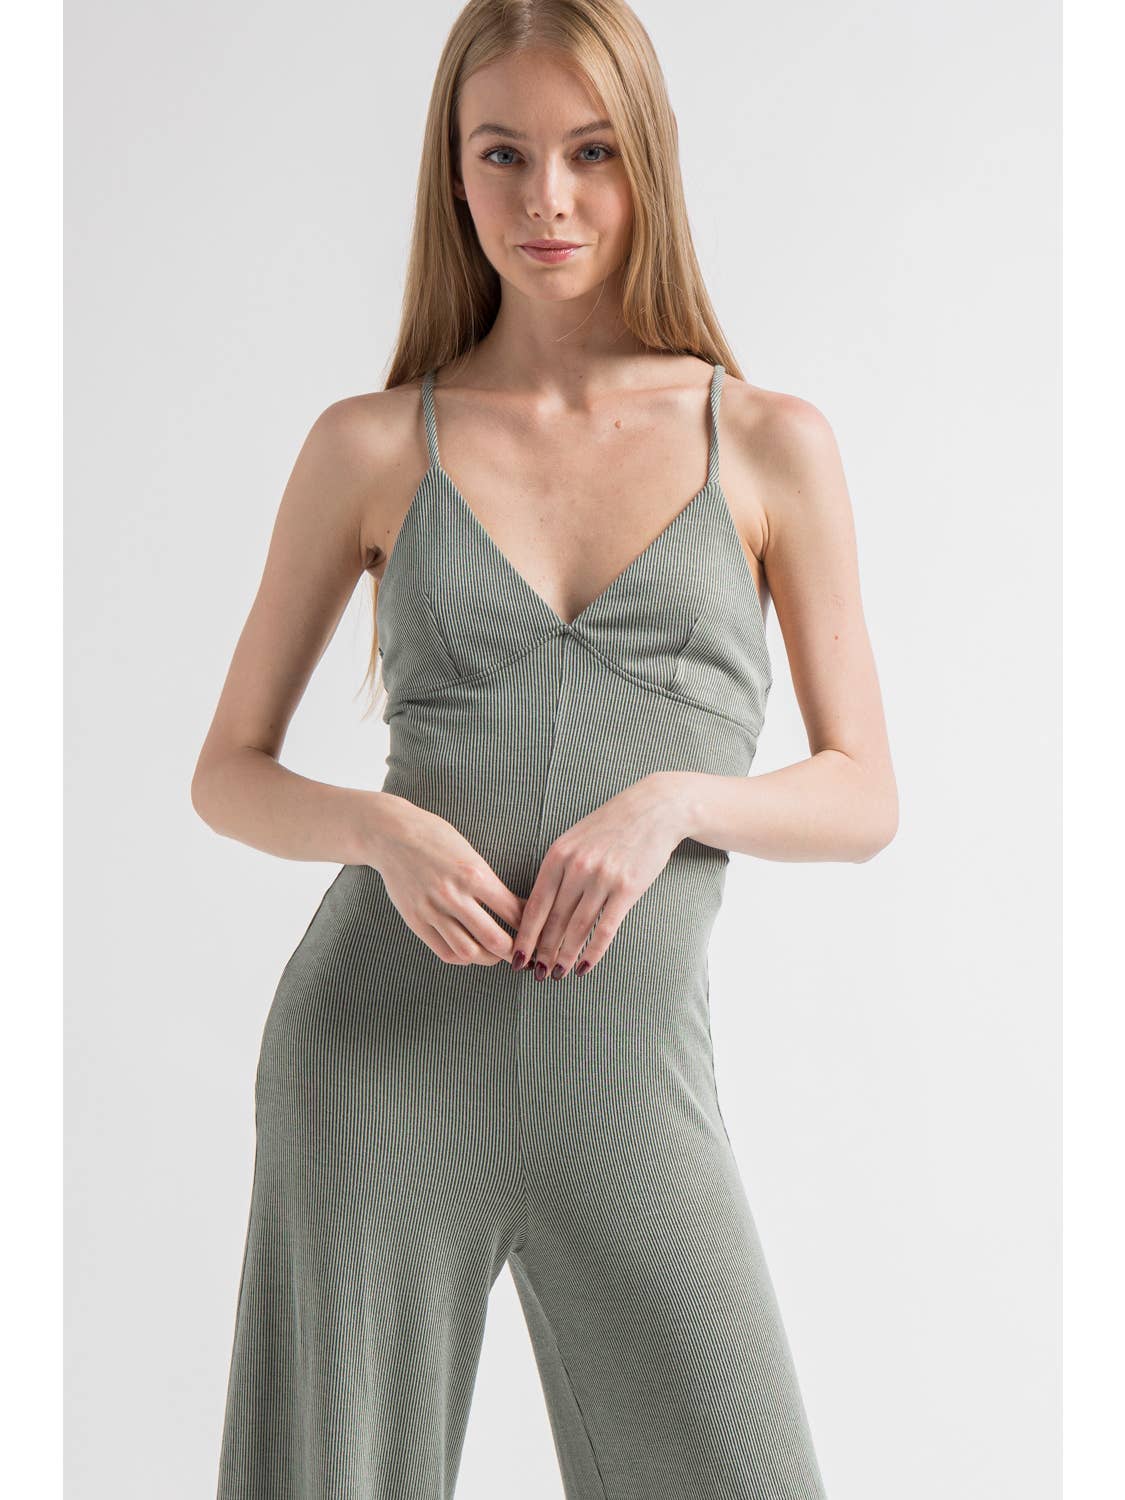 Fore-Olive Jumpsuit